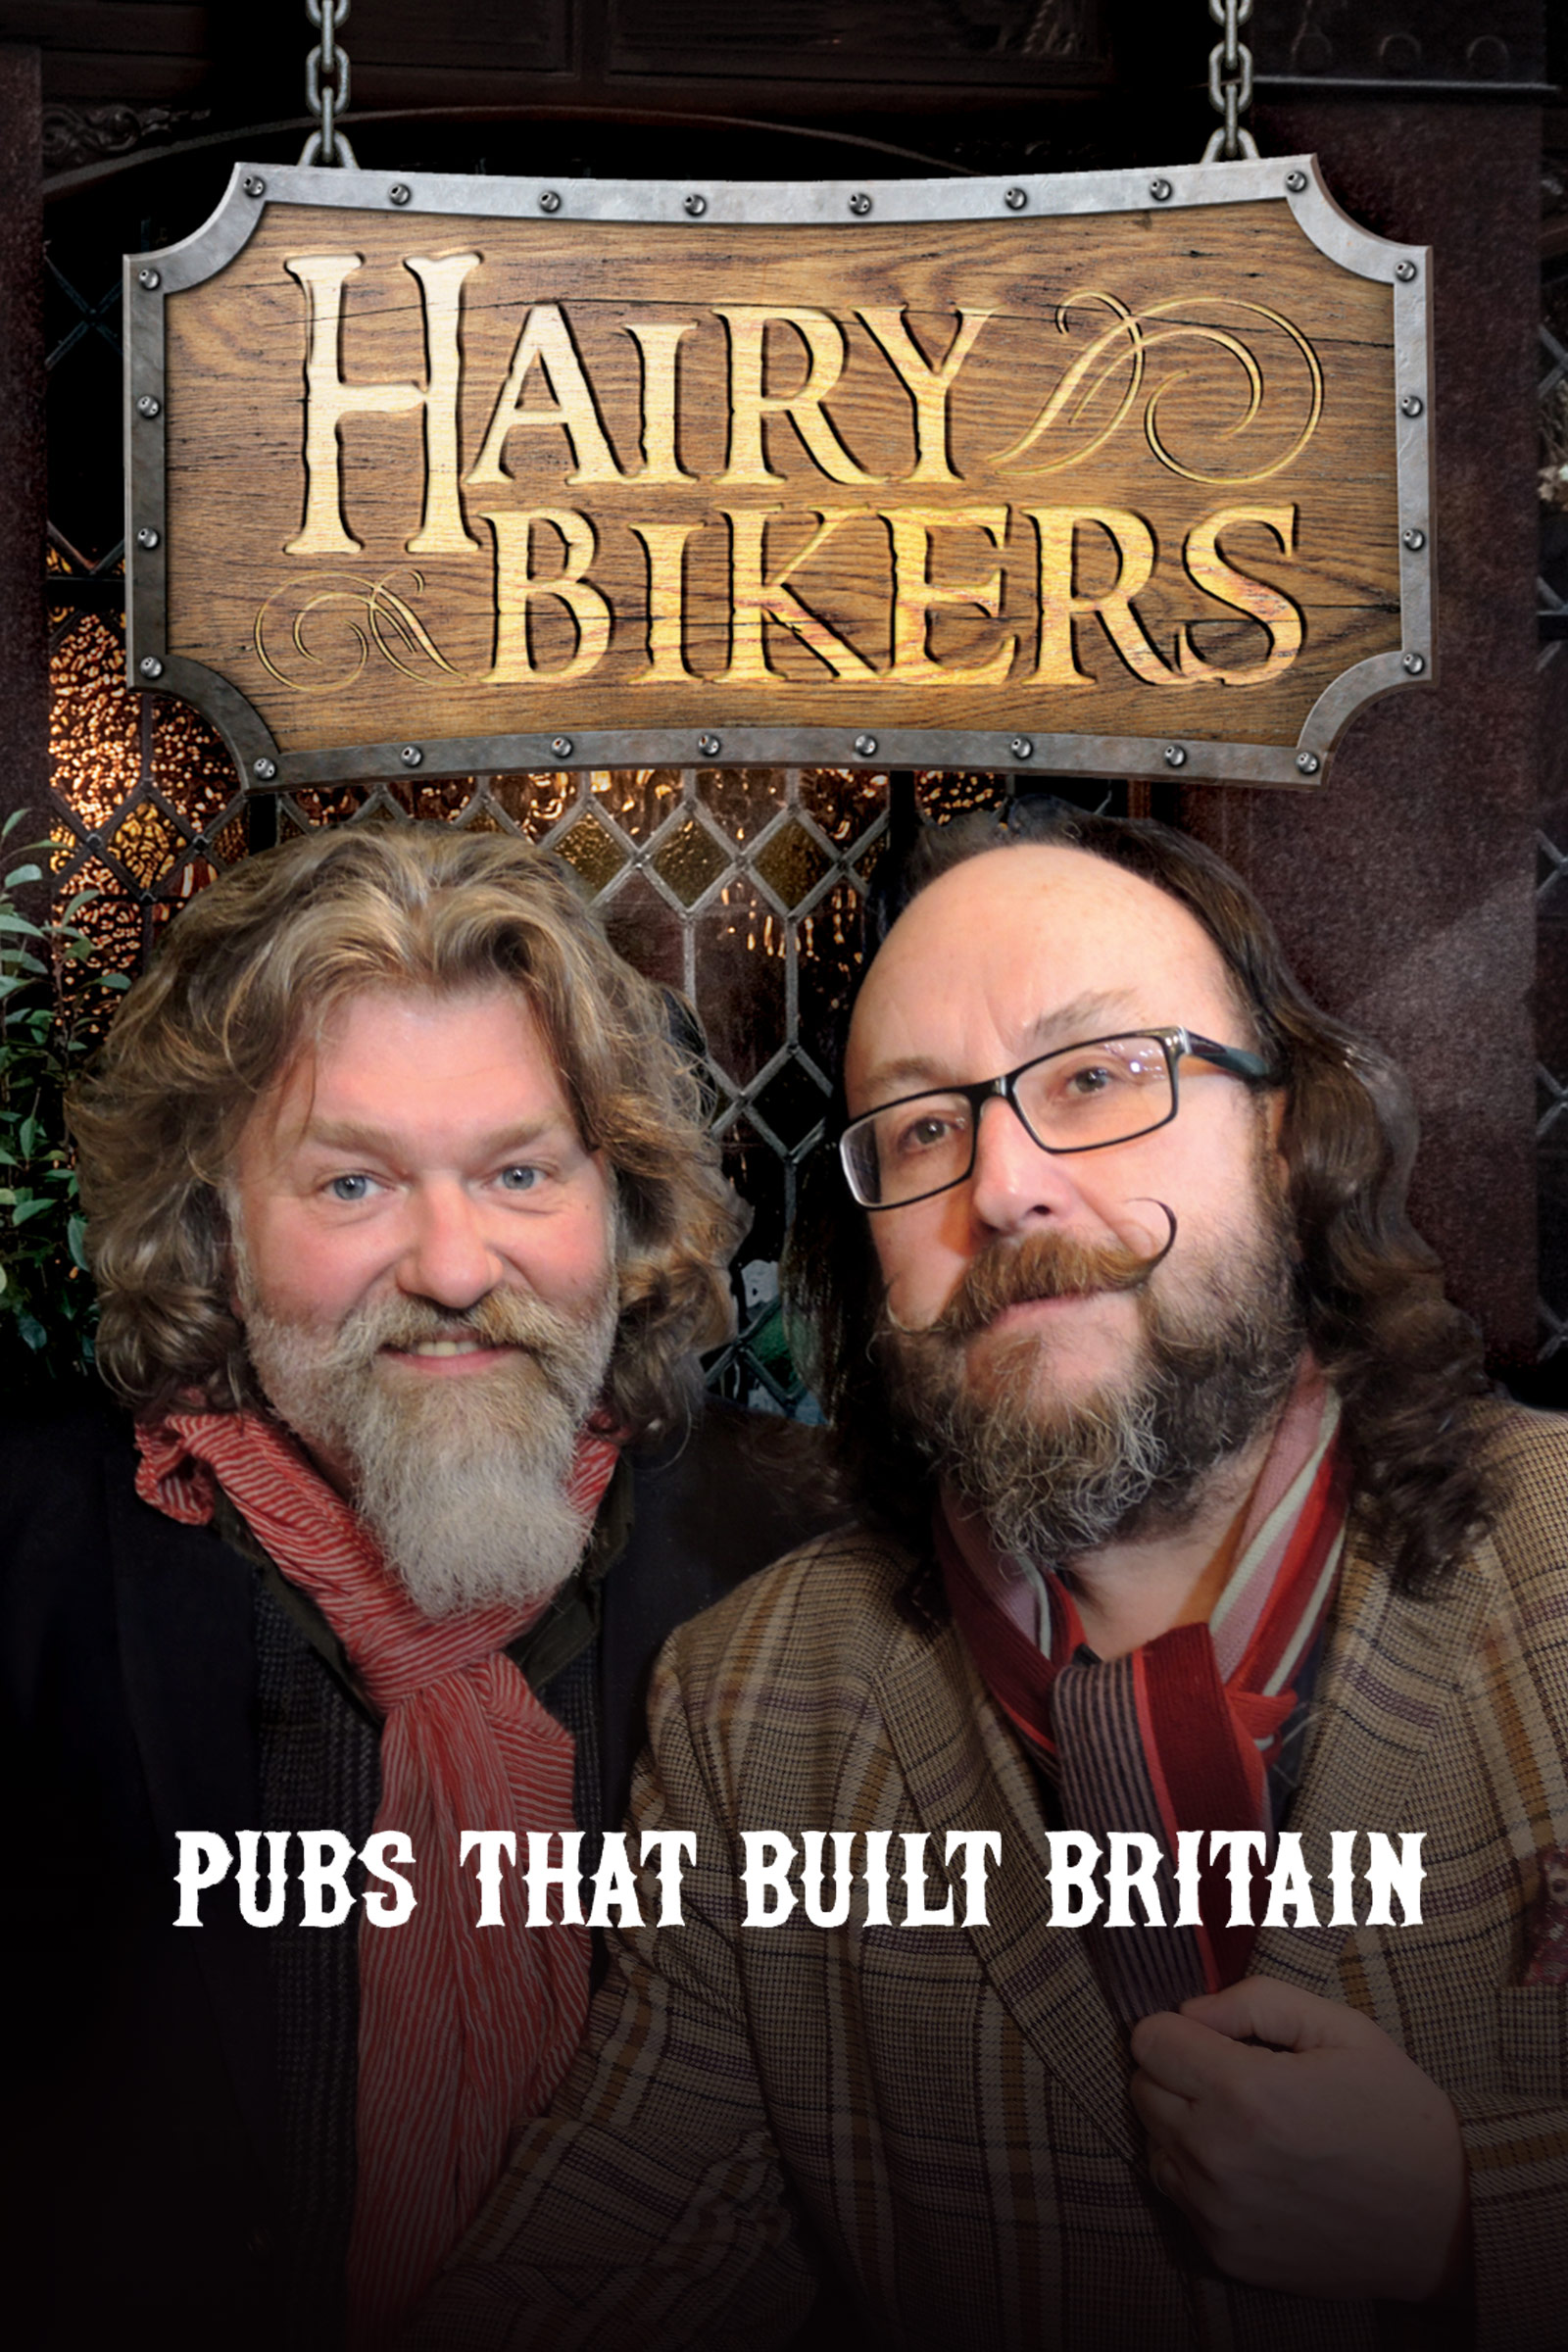 Where to stream The Hairy Bikers' Pubs that Built Britain